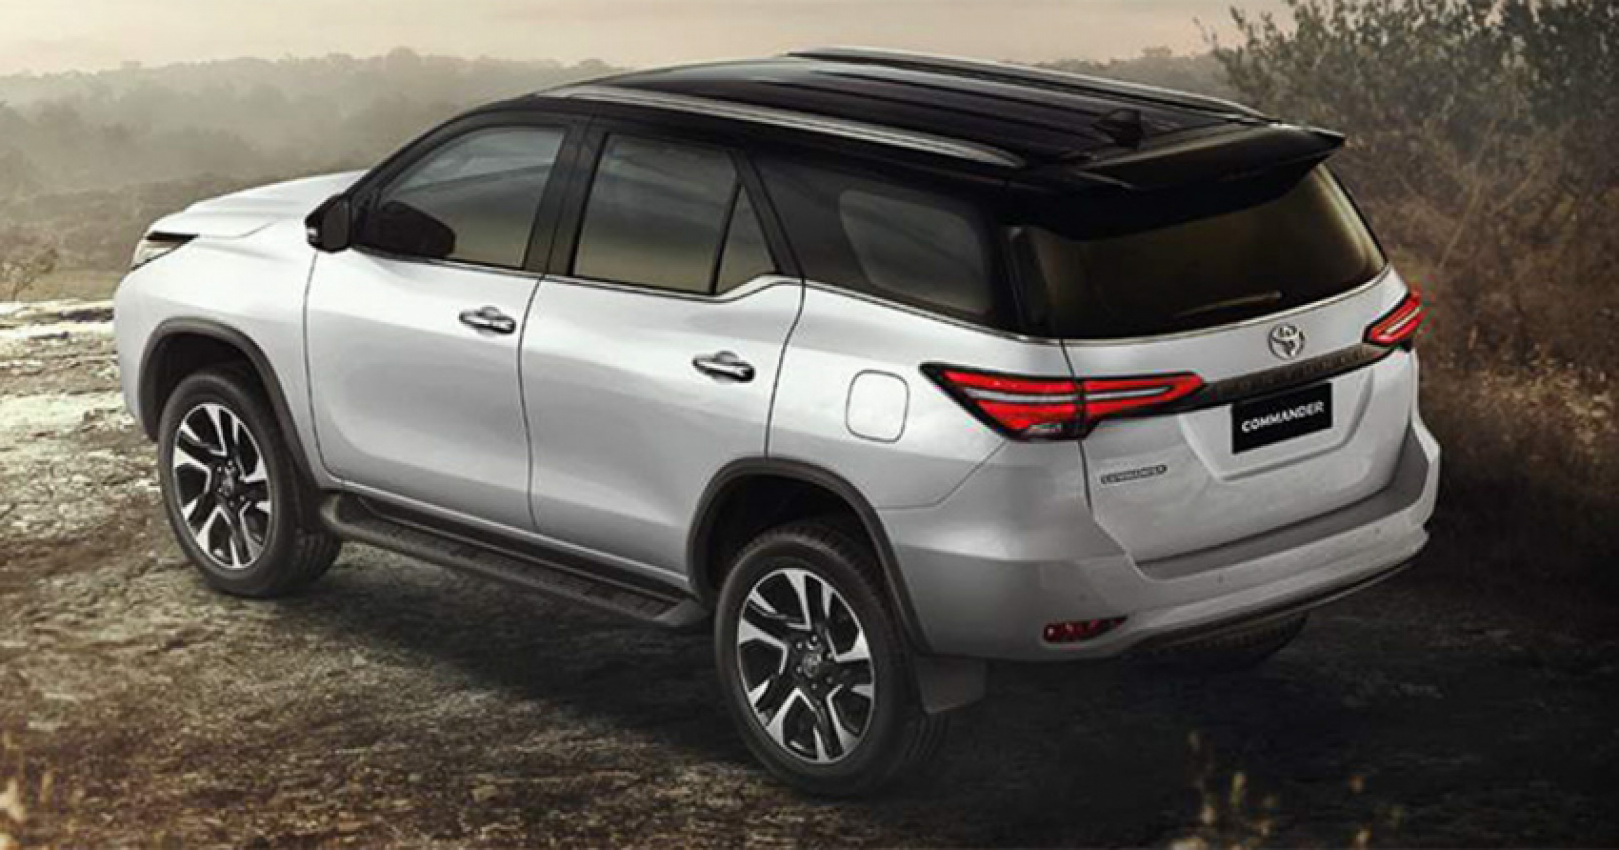 auto news, autos, cars, toyota, fortuner, fortuner commander, thailand, toyota fortuner, toyota fortuner commander, toyota motor thailand, 2022 toyota fortuner commander is ready to lead